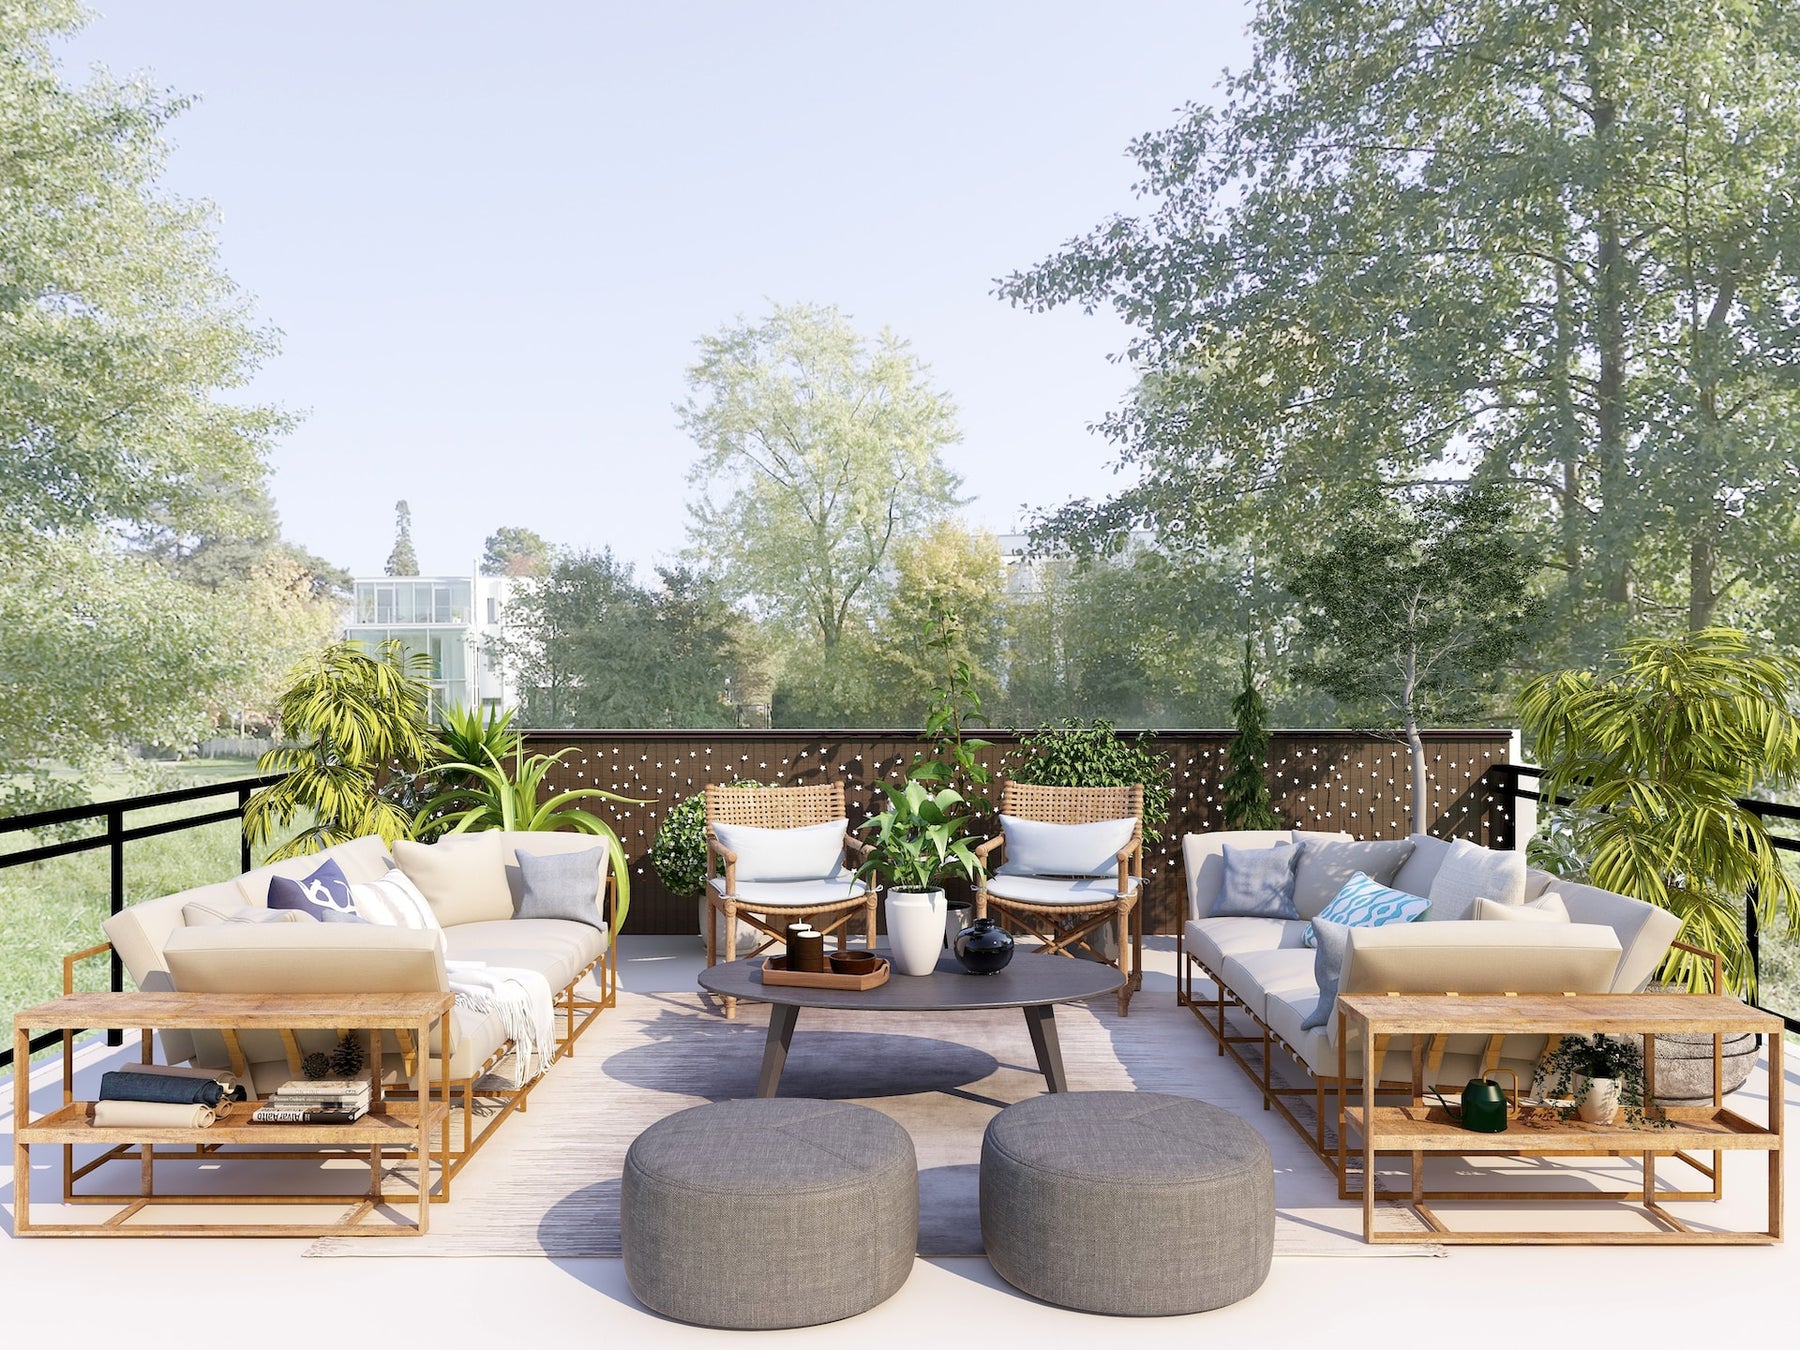 8 Furniture Pieces That Will Enhance Your Outdoor Living Space